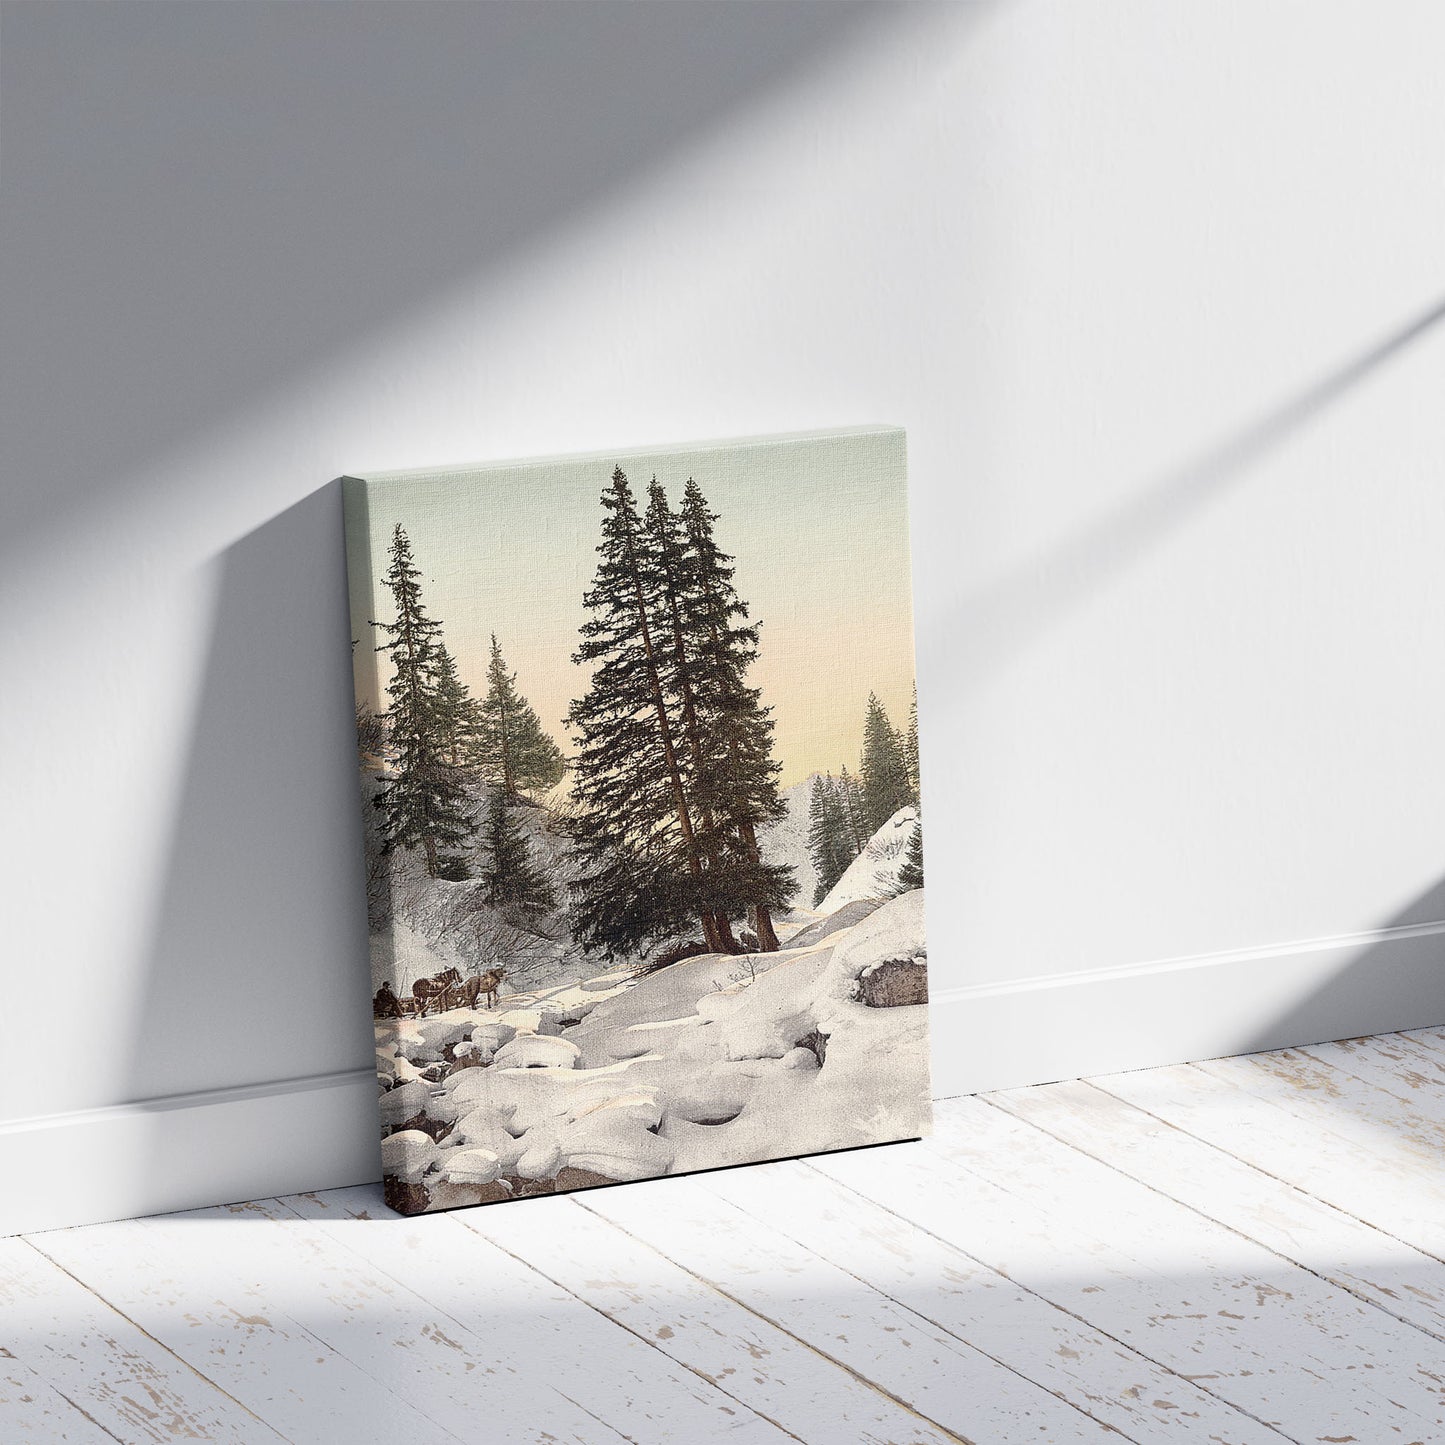 A picture of Davos, in winter, Grisons, Switzerland, a mockup of the print leaning against a wall